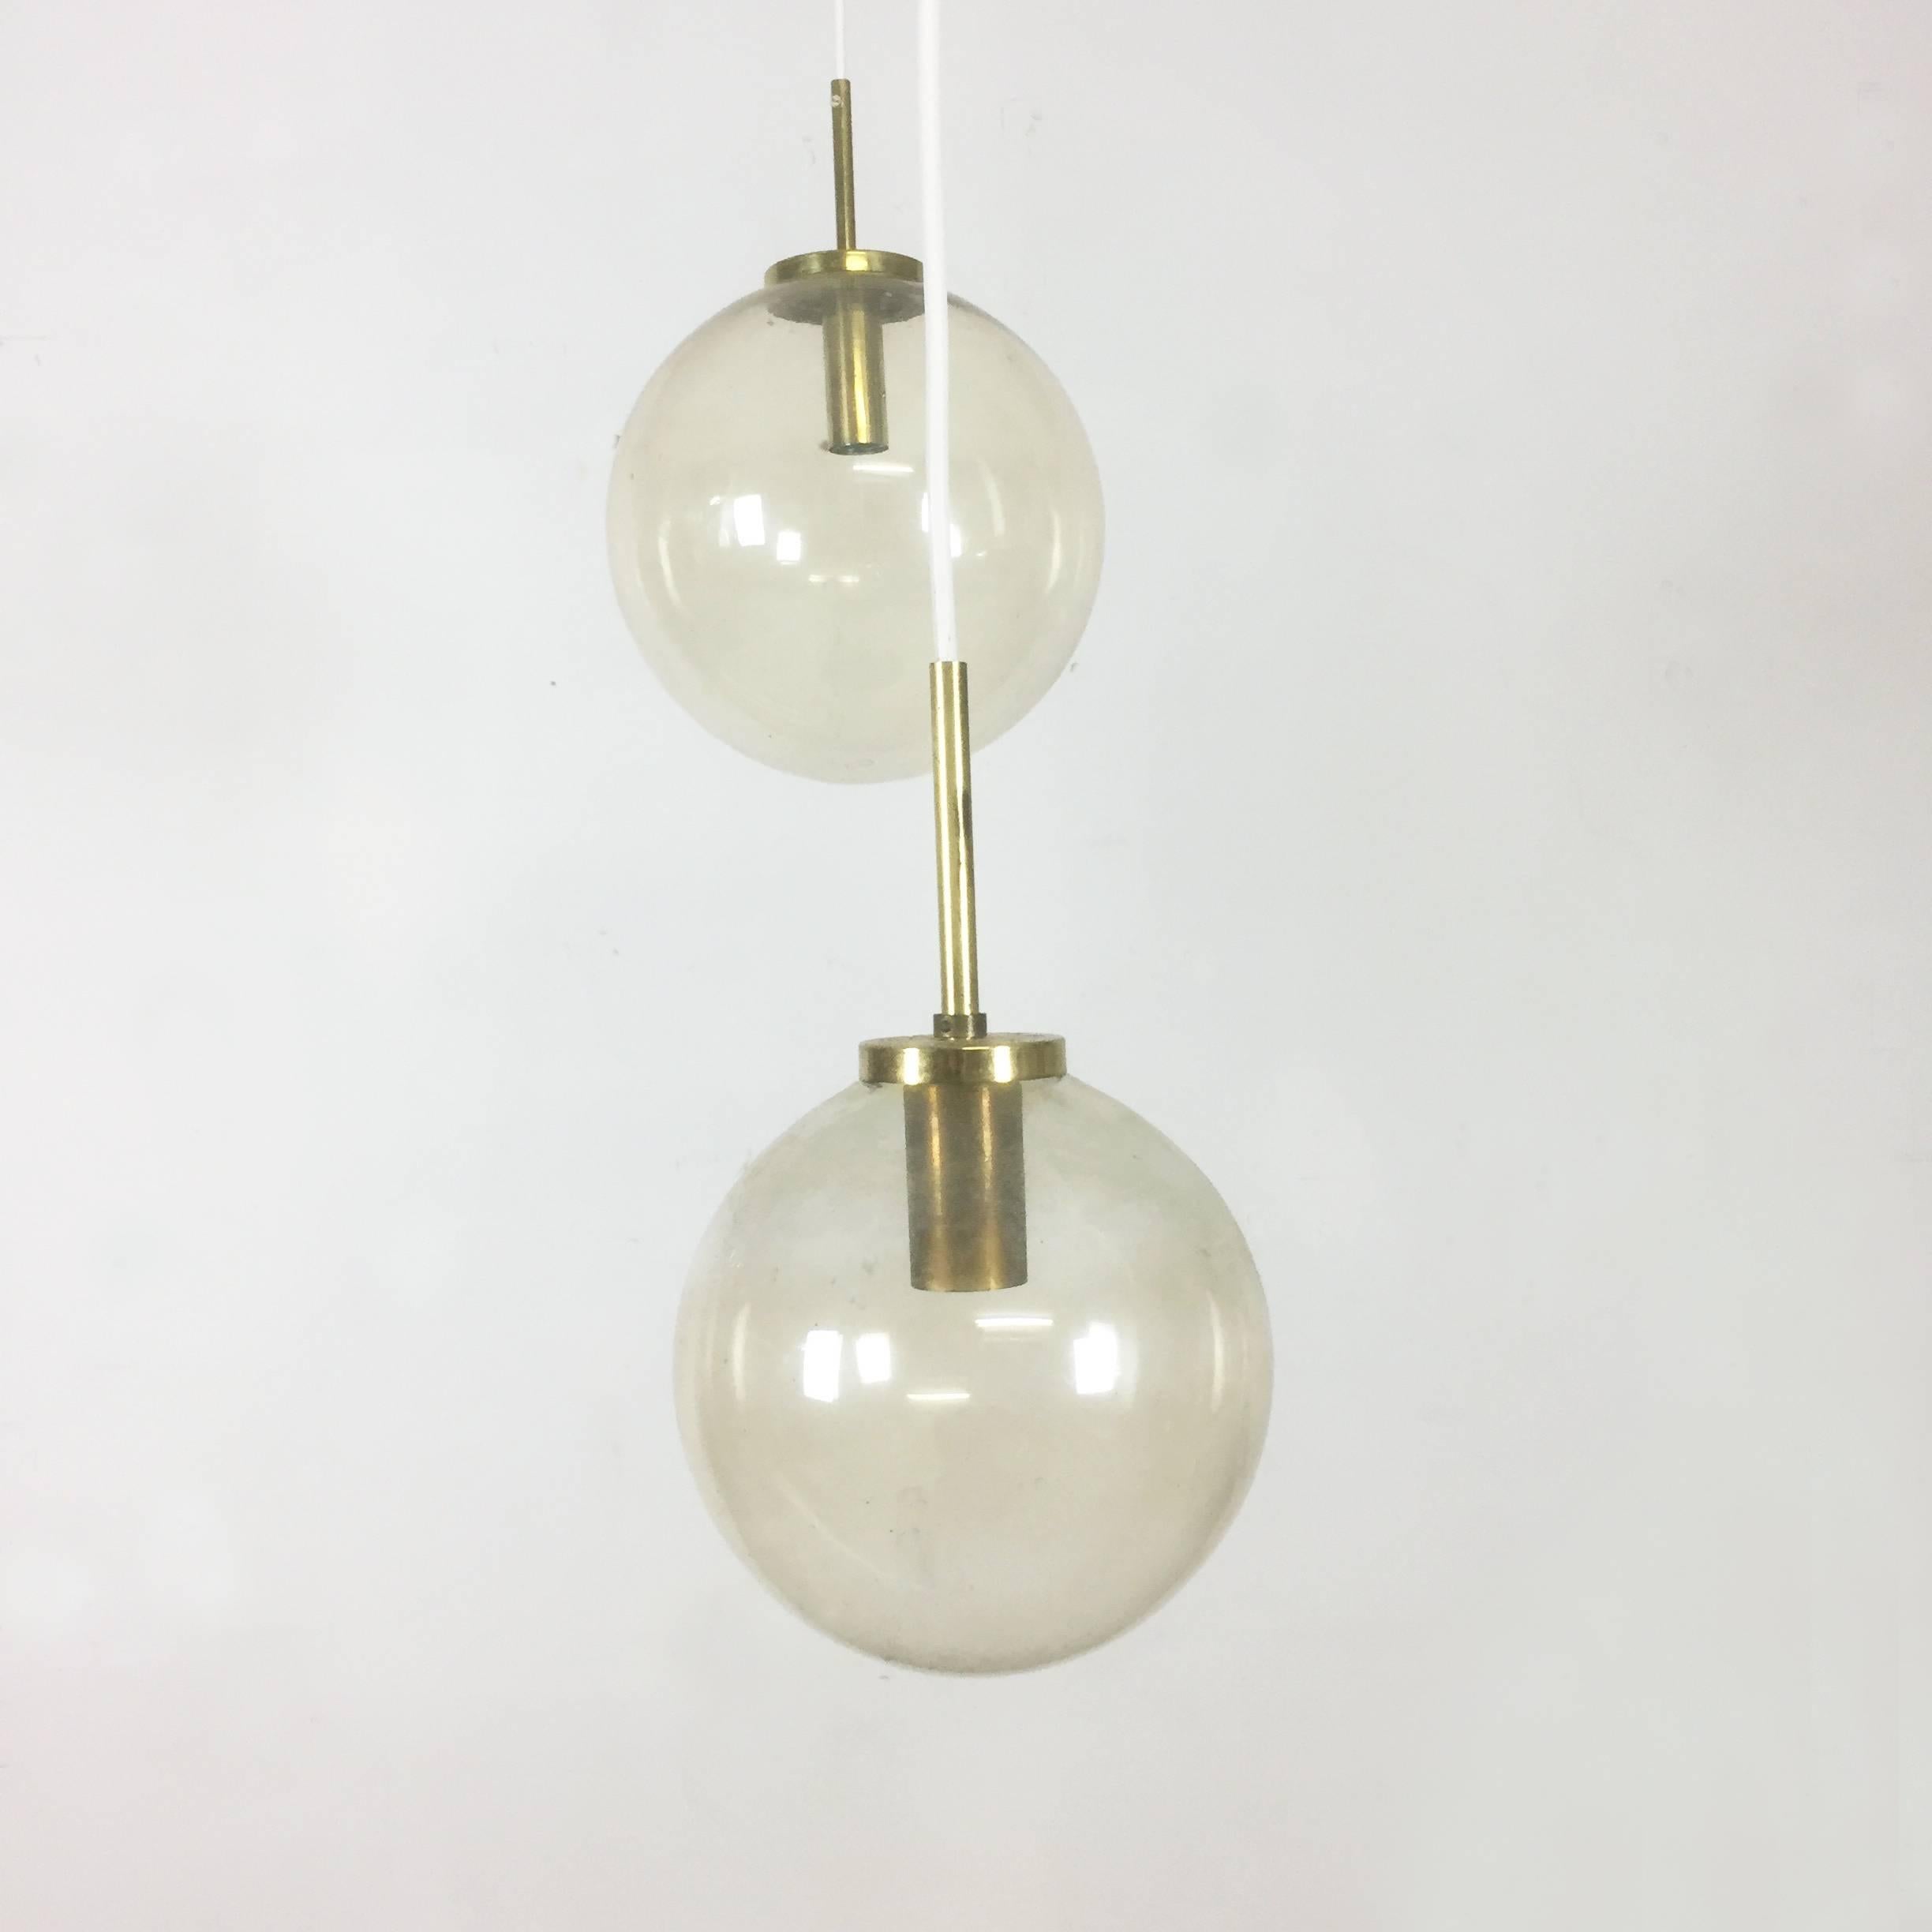 Article: Hanging light set of three


Producer: Glashütte Limburg


Origin: Germany


Age: 1960s 


Description: 

This fantastic set of three ball hanging lights was designed and produced in 1960s in Germany by Glashütte Limburg. The